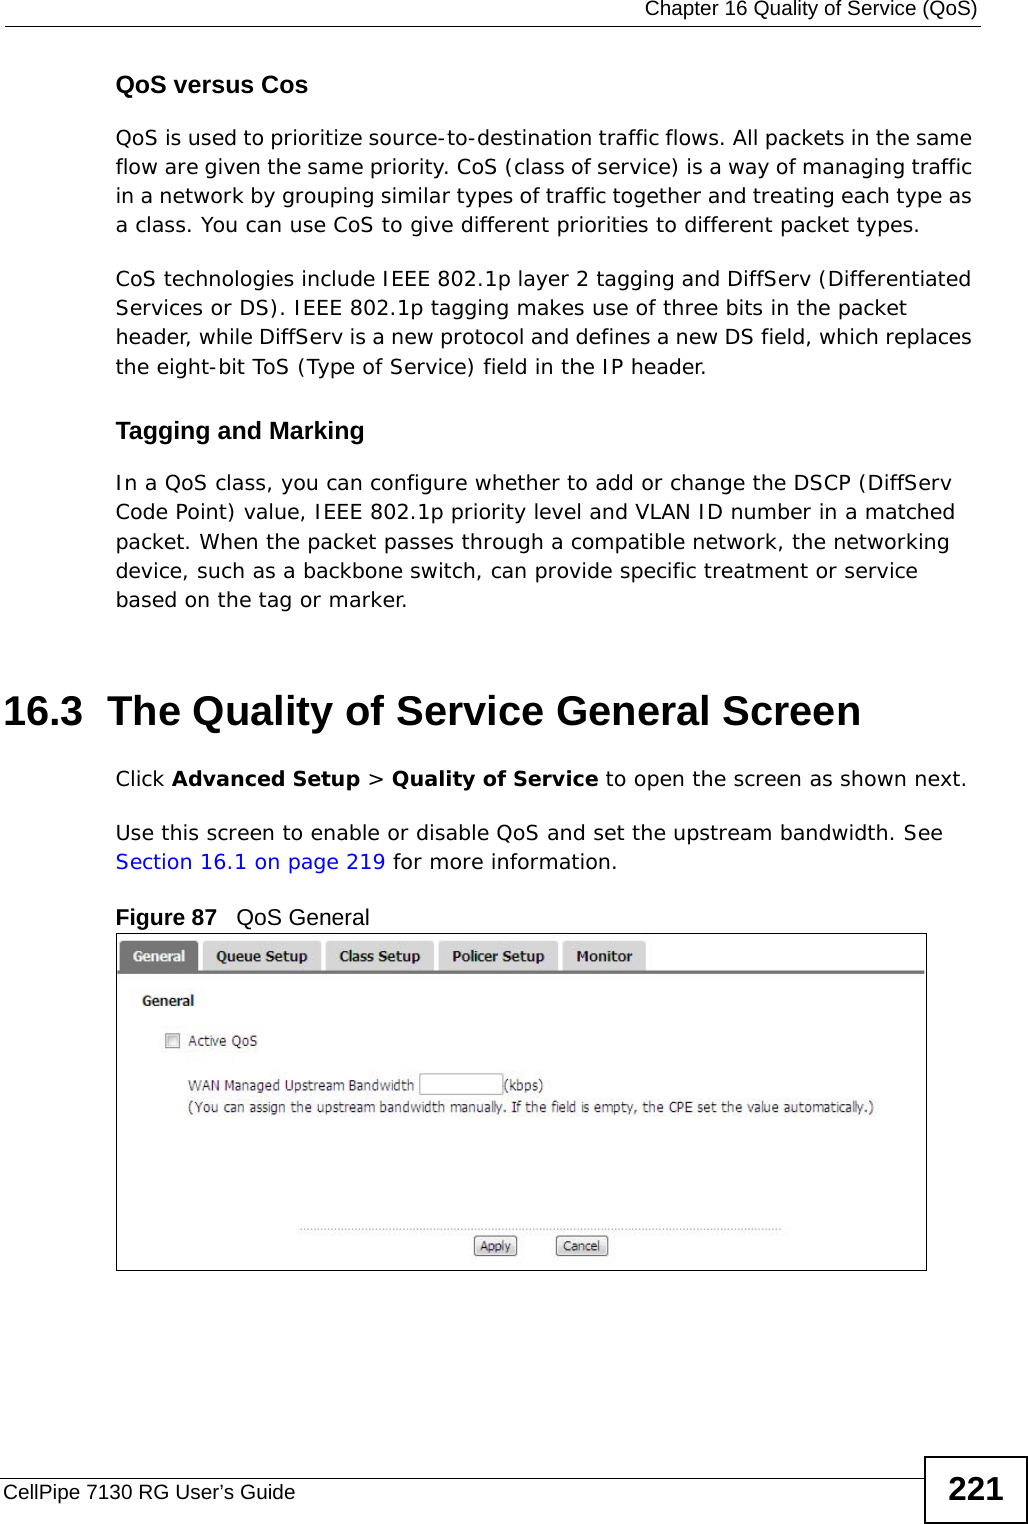  Chapter 16 Quality of Service (QoS)CellPipe 7130 RG User’s Guide 221QoS versus CosQoS is used to prioritize source-to-destination traffic flows. All packets in the same flow are given the same priority. CoS (class of service) is a way of managing traffic in a network by grouping similar types of traffic together and treating each type as a class. You can use CoS to give different priorities to different packet types. CoS technologies include IEEE 802.1p layer 2 tagging and DiffServ (Differentiated Services or DS). IEEE 802.1p tagging makes use of three bits in the packet header, while DiffServ is a new protocol and defines a new DS field, which replaces the eight-bit ToS (Type of Service) field in the IP header. Tagging and MarkingIn a QoS class, you can configure whether to add or change the DSCP (DiffServ Code Point) value, IEEE 802.1p priority level and VLAN ID number in a matched packet. When the packet passes through a compatible network, the networking device, such as a backbone switch, can provide specific treatment or service based on the tag or marker.16.3  The Quality of Service General Screen Click Advanced Setup &gt; Quality of Service to open the screen as shown next. Use this screen to enable or disable QoS and set the upstream bandwidth. See Section 16.1 on page 219 for more information.Figure 87   QoS General 